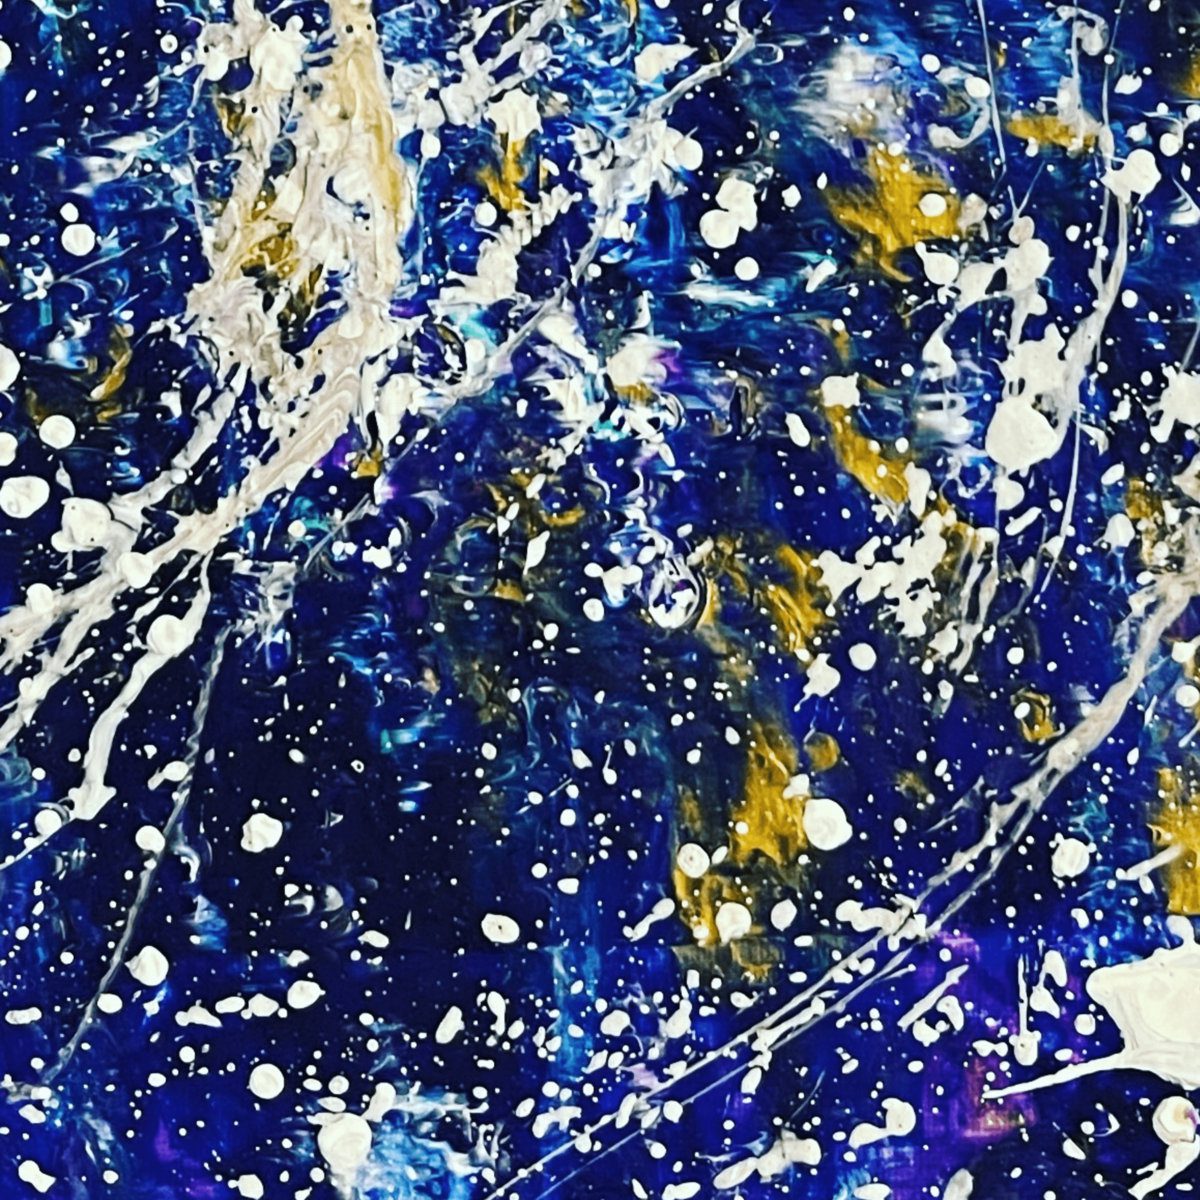 An abstract painting and album artwork by Billy Wilcosky. Dark blue background with splashes of white, gold, and blue paints.